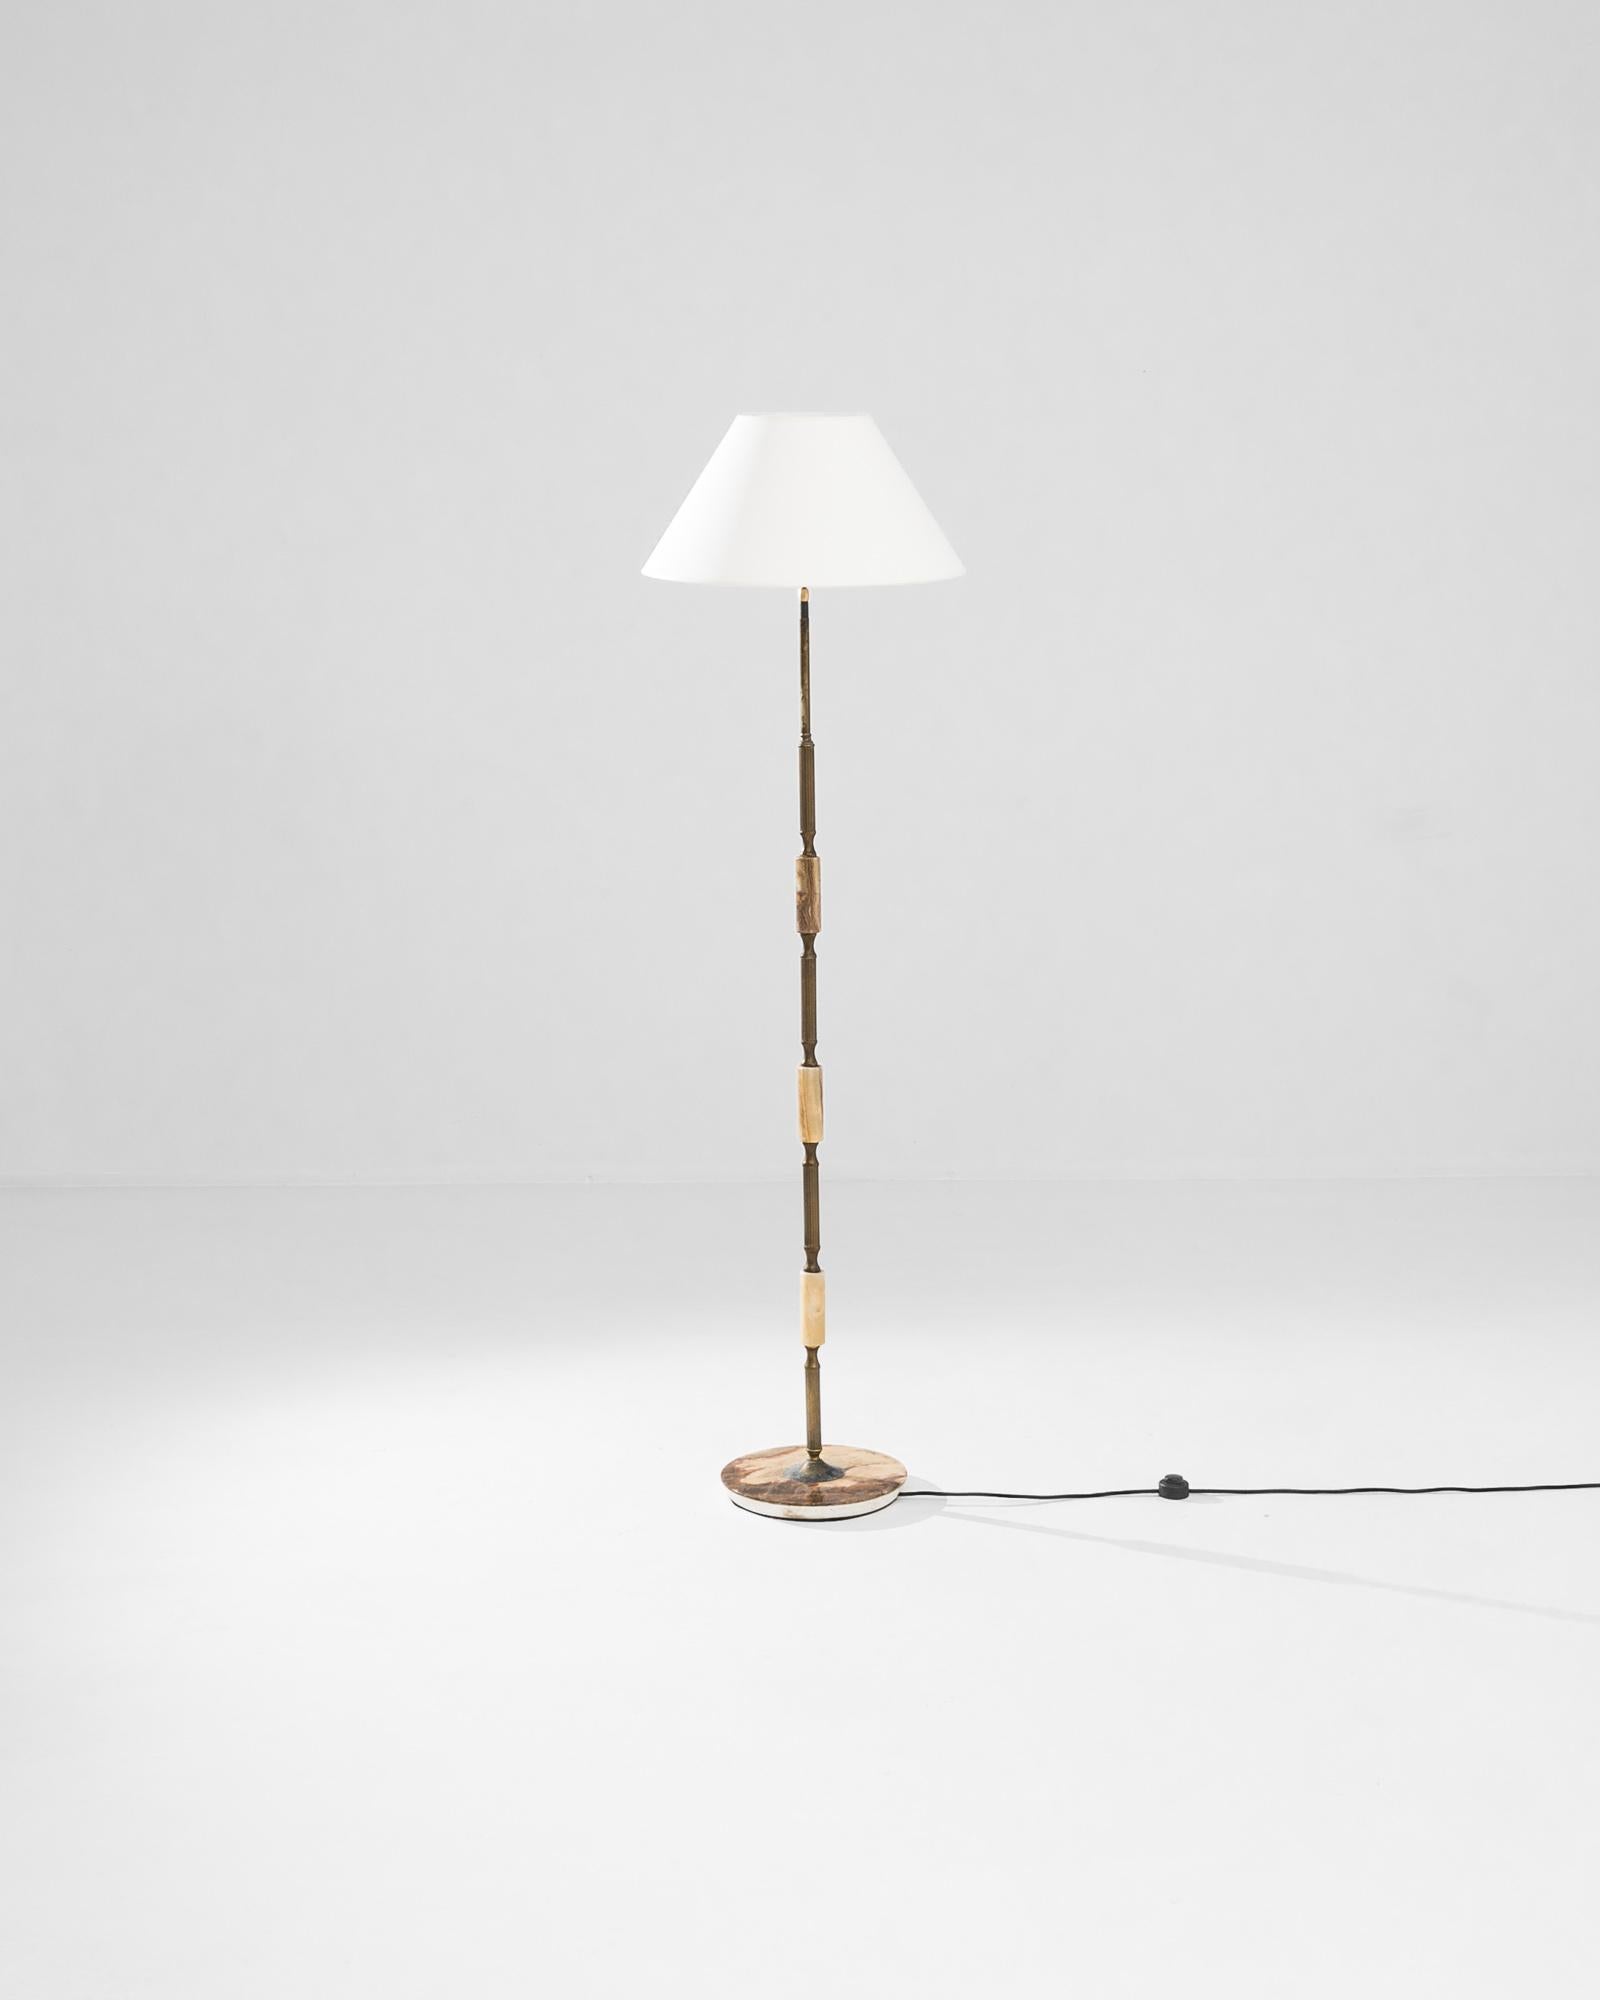 This 1960s floor lamp epitomizes Mid-Century Modern sophistication. Sourced from France, the pristine simplicity of the linear silhouette is embellished with onyx accents: the contrast between the liquid veining of the gemstone and the fluted detail